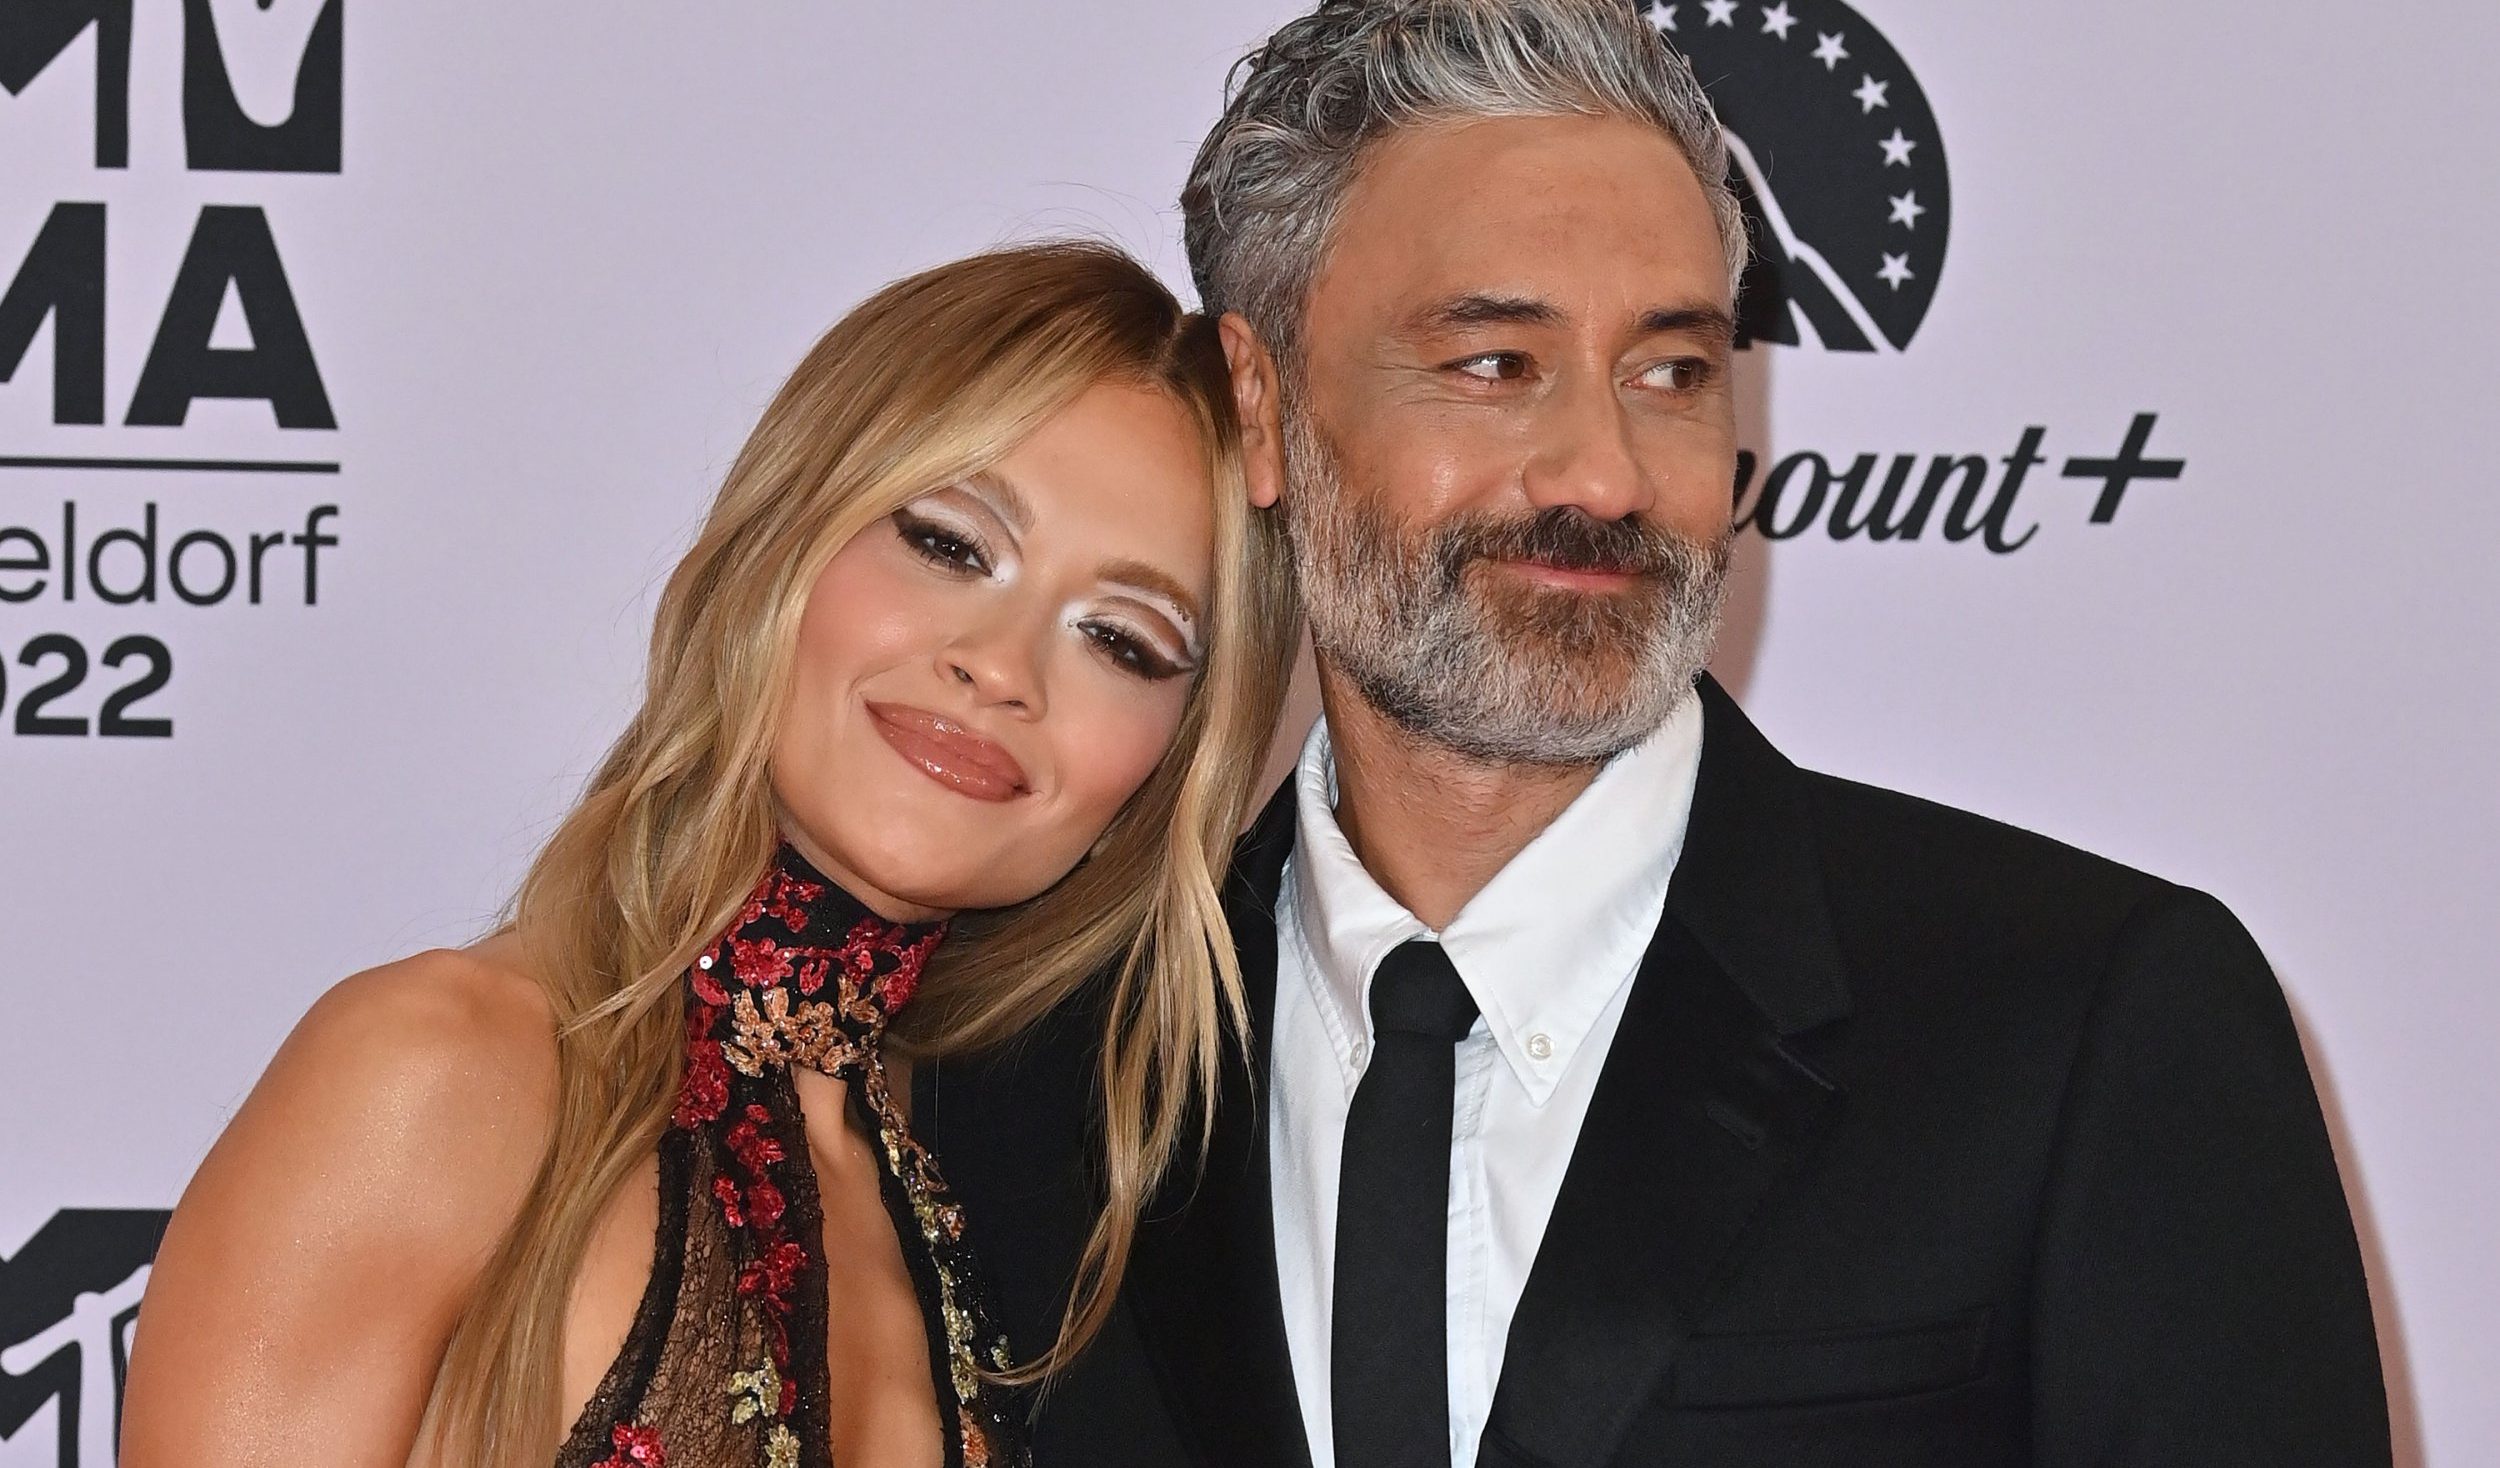 Rita Ora spills details on first date with filmmaker husband Taika Waititi: ‘That’s when everything clicked’